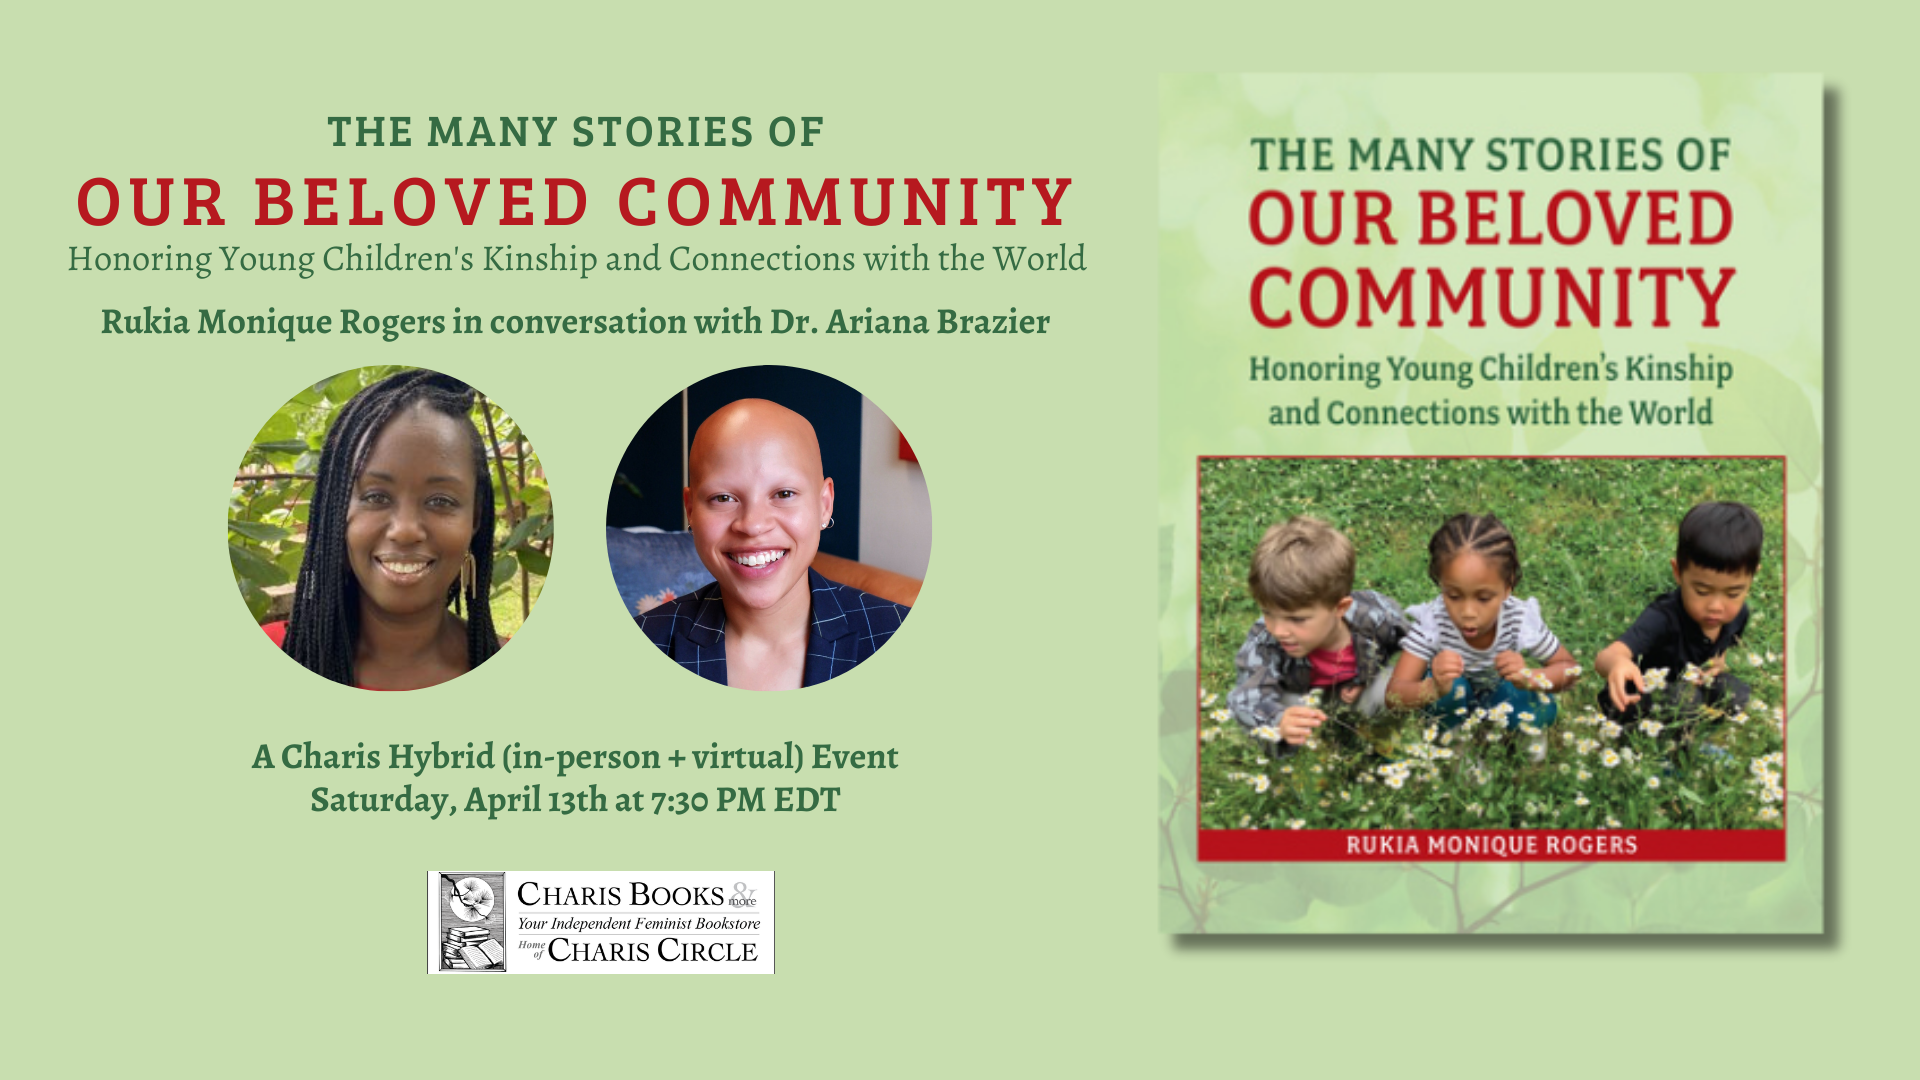 The Many Stories of Our Beloved Community: Honoring Young Children's Kinship and Connections with the World--Rukia Monique Rogers in conversation with Dr. Ariana Brazier event cover photo